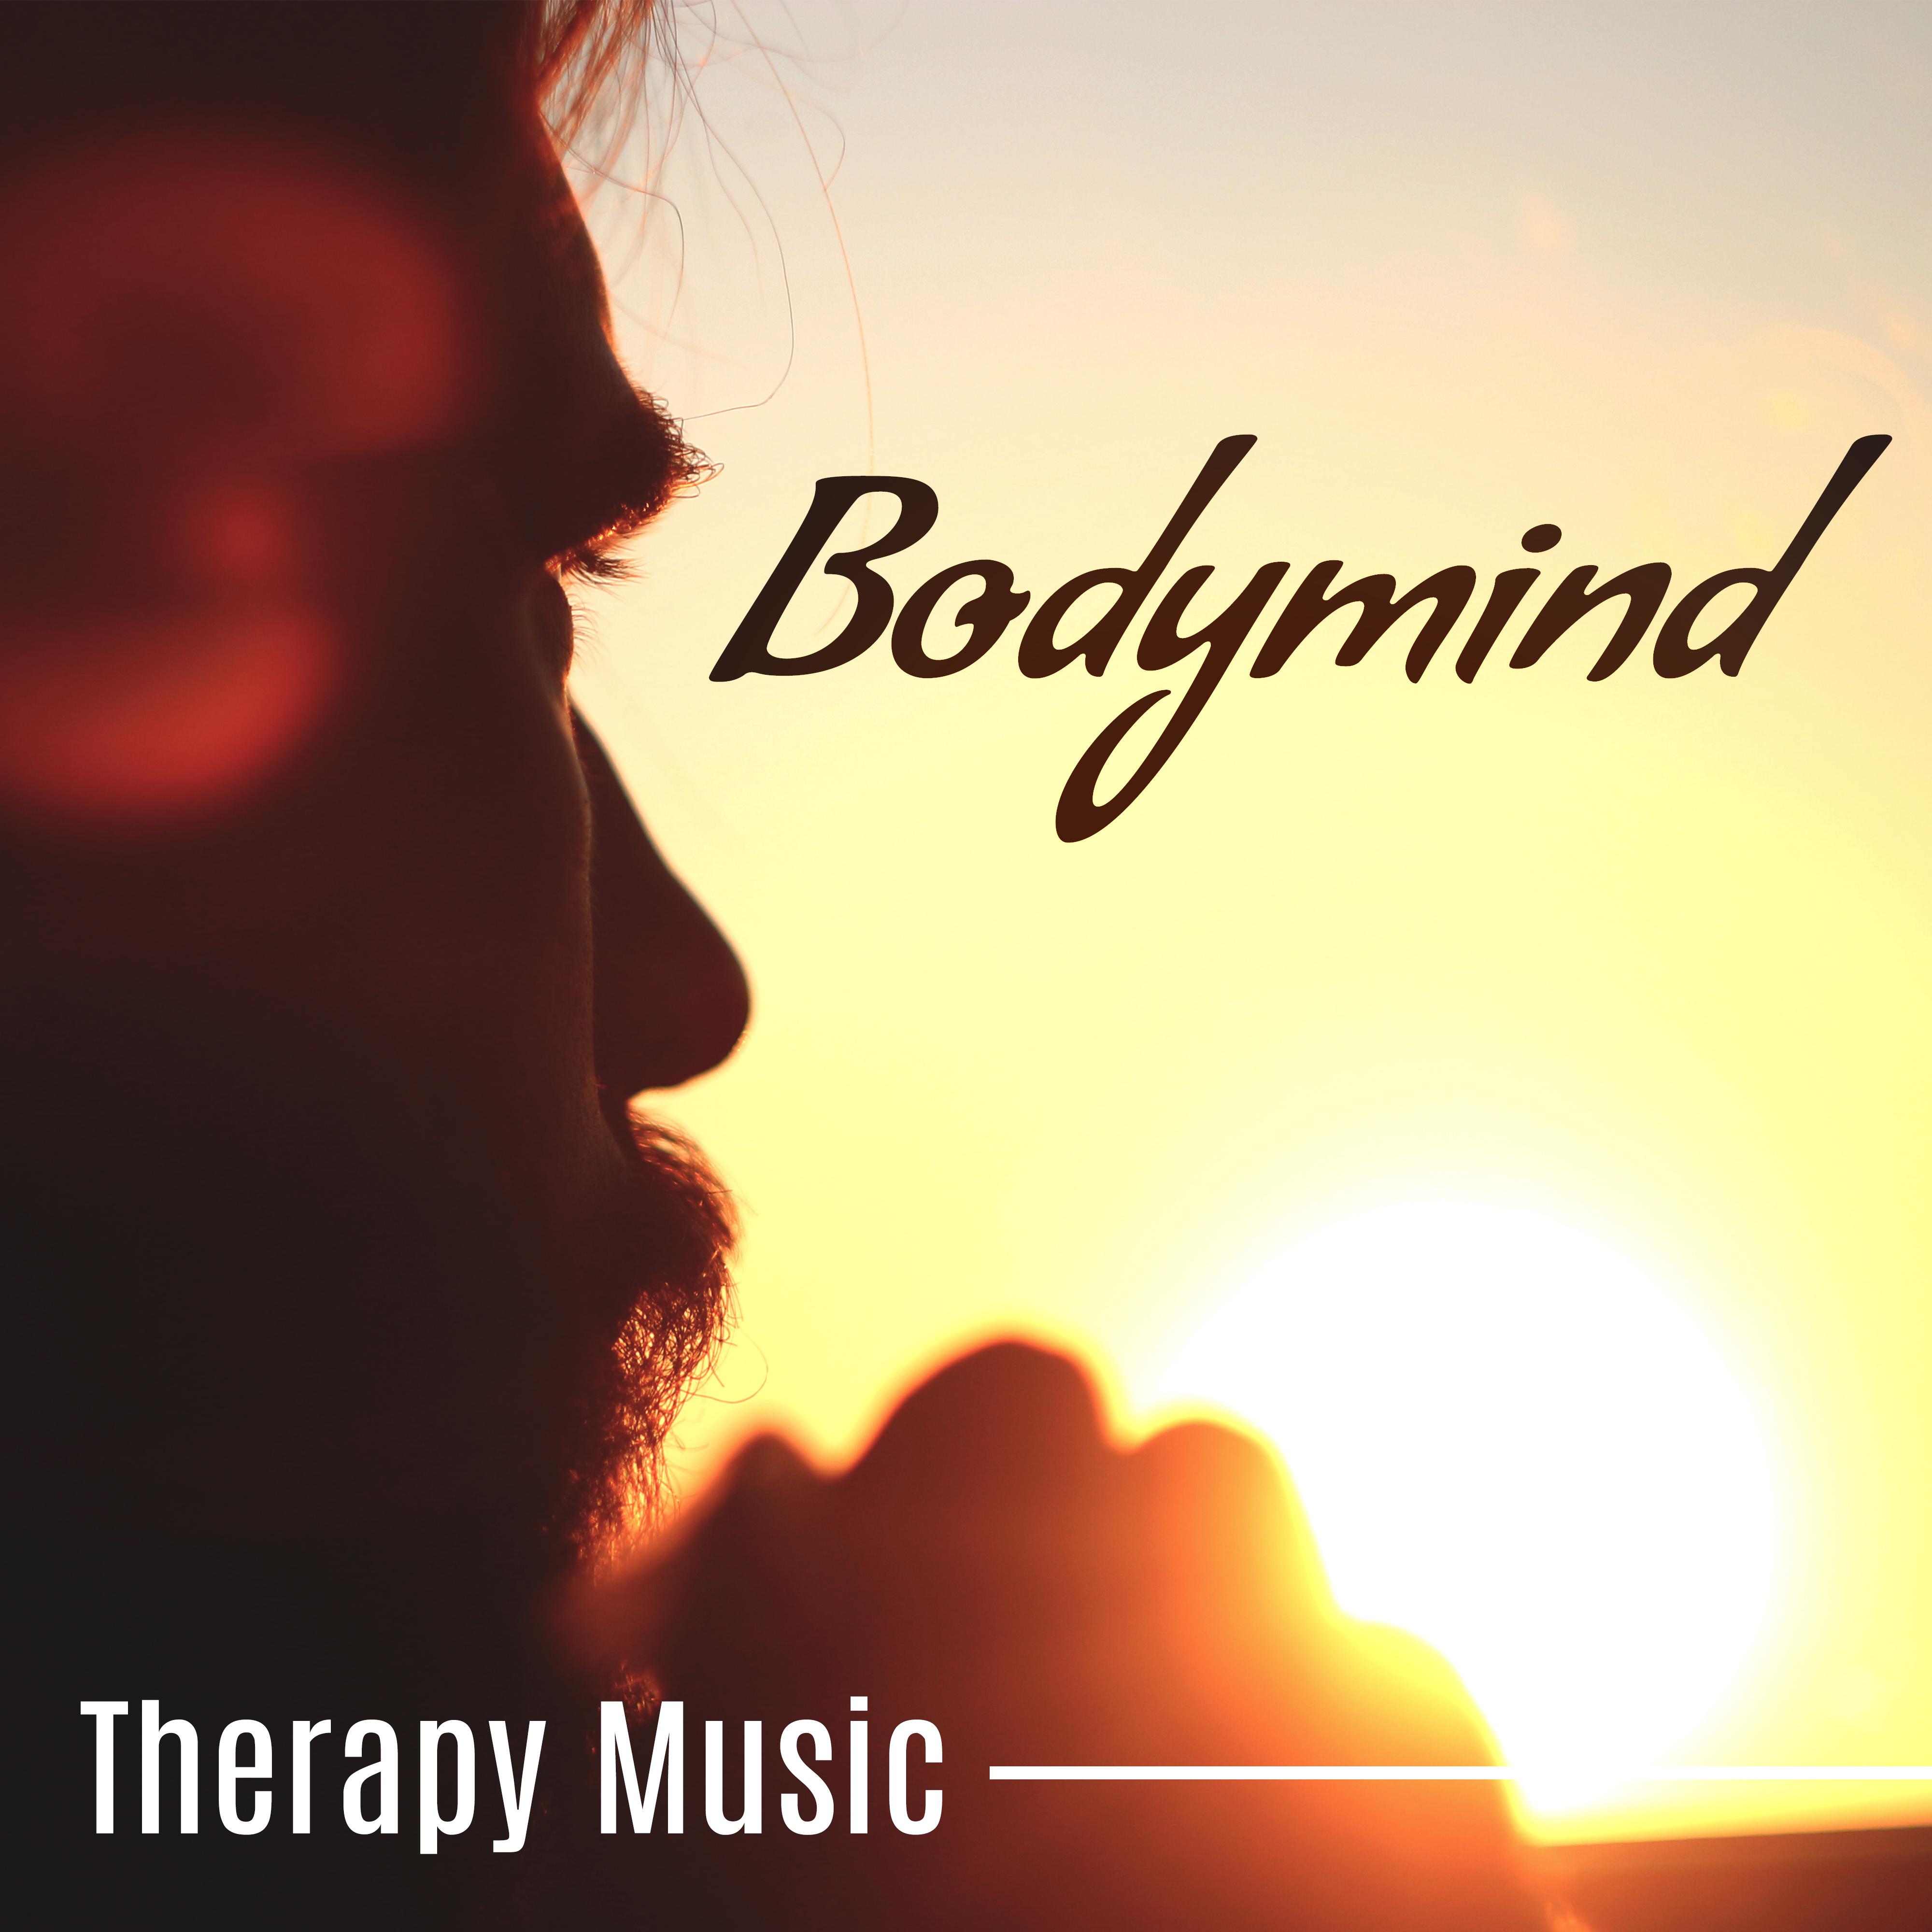 Bodymind Therapy Music – Calming Nature Sounds, Relaxing Music for Better Sleep, Full Rest, Deep Relaxation